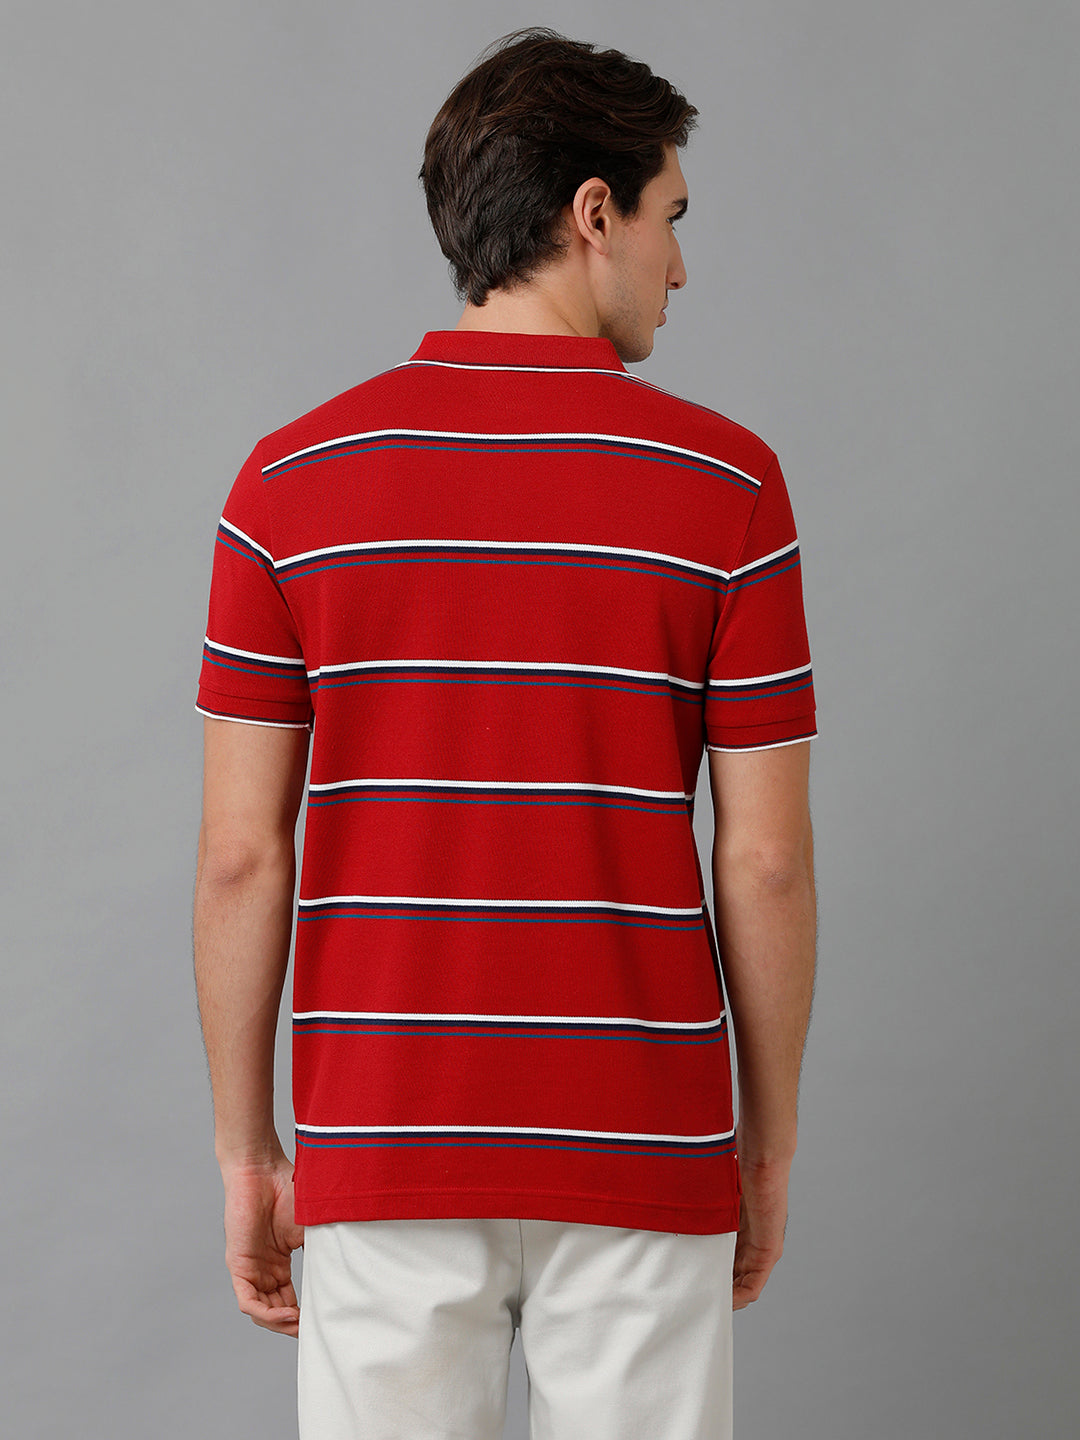 Classic Polo Men's Cotton Blend Striped Half Sleeve Slim Fit Polo Neck Red Color T-Shirt | Adore - 191 B